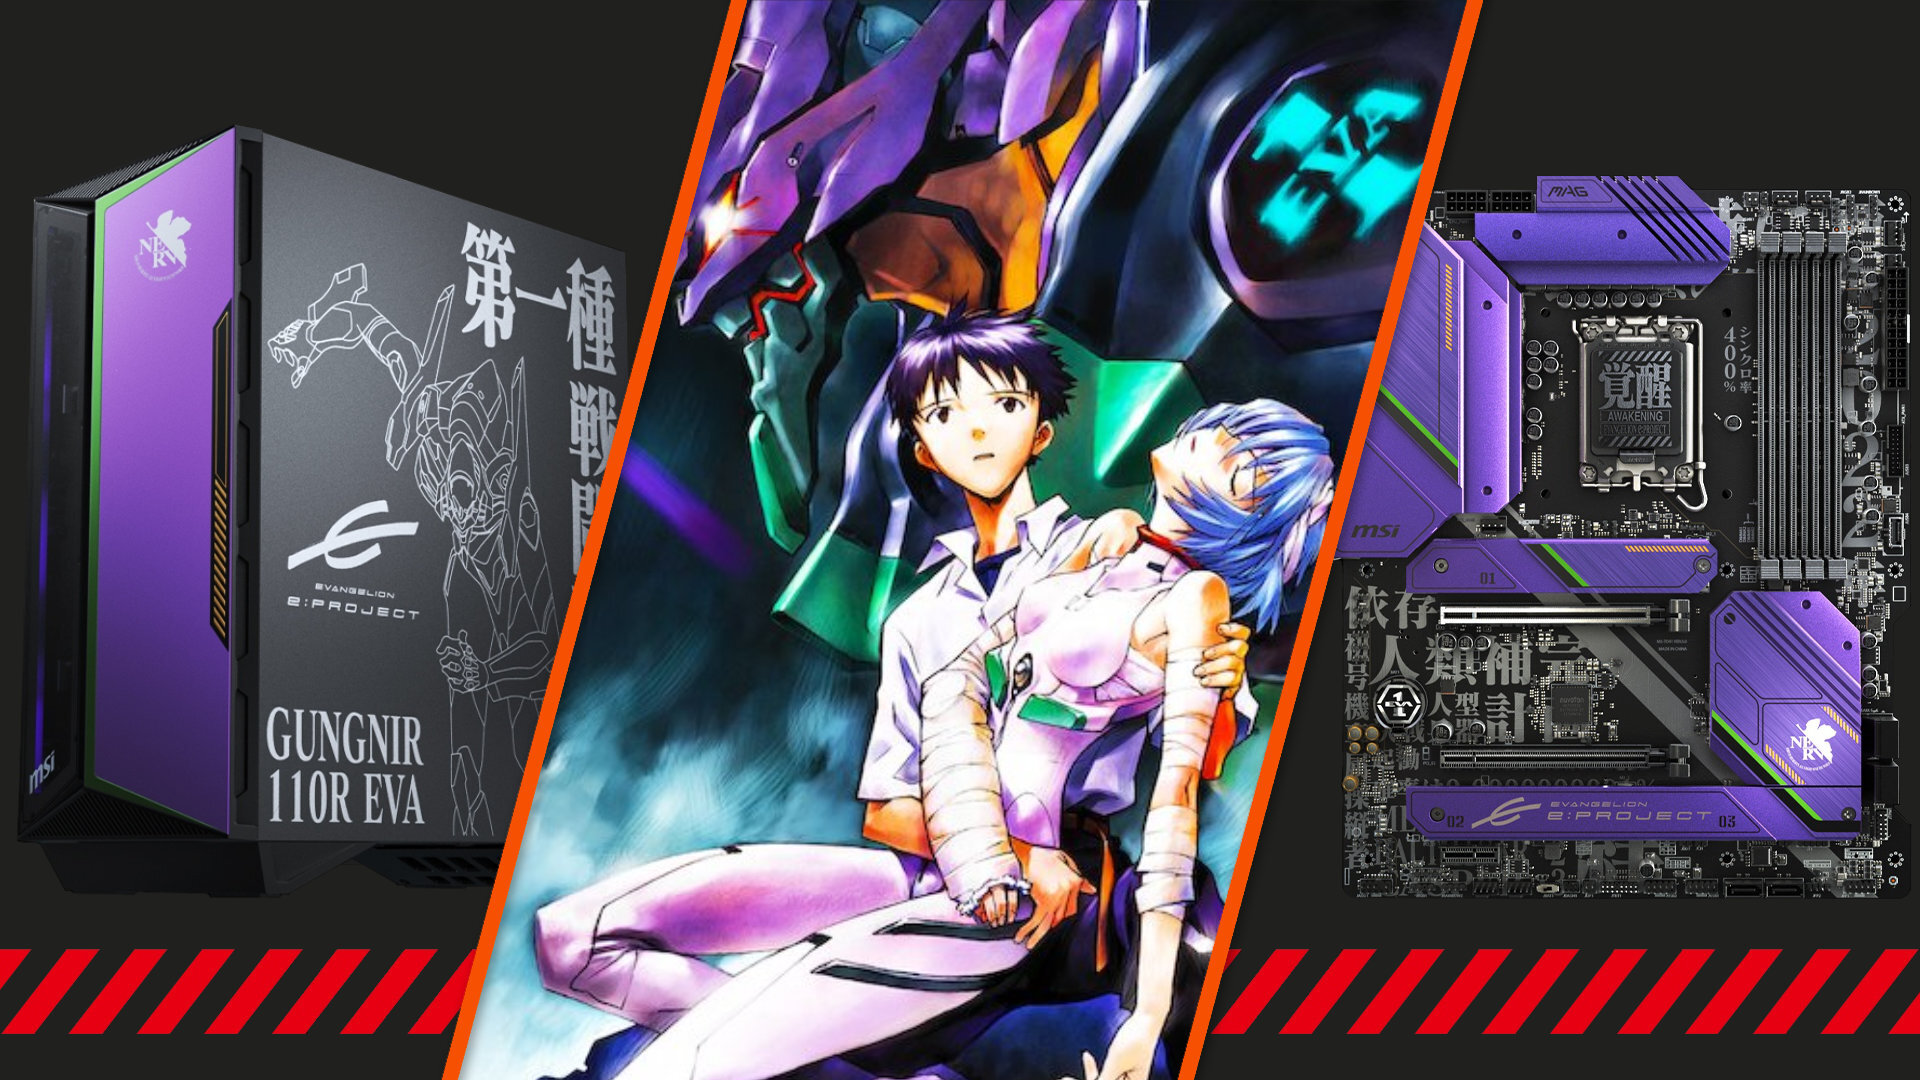 MSI's Evangelion gaming PC collection is fan service done right